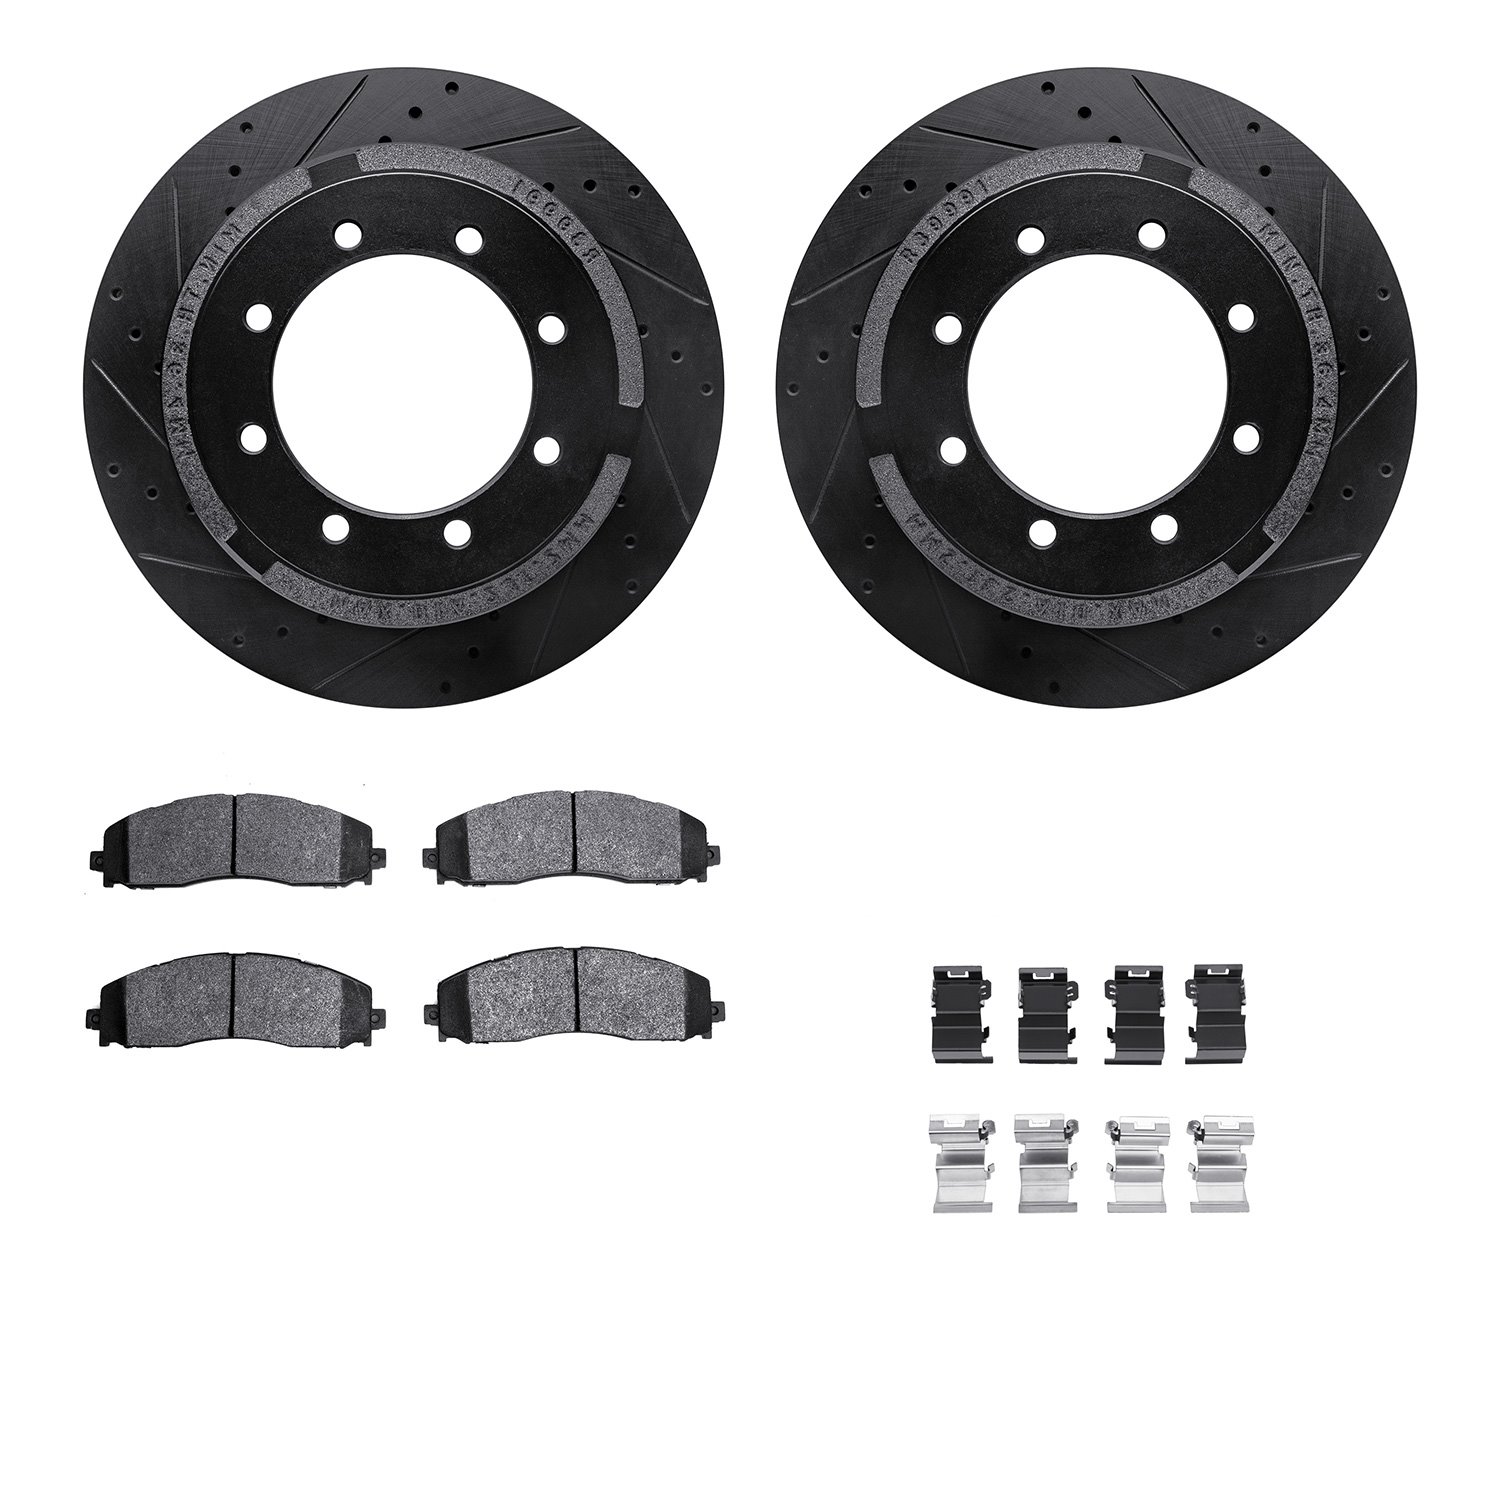 8412-54100 Drilled/Slotted Brake Rotors with Ultimate-Duty Brake Pads Kit & Hardware [Black], Fits Select Ford/Lincoln/Mercury/M